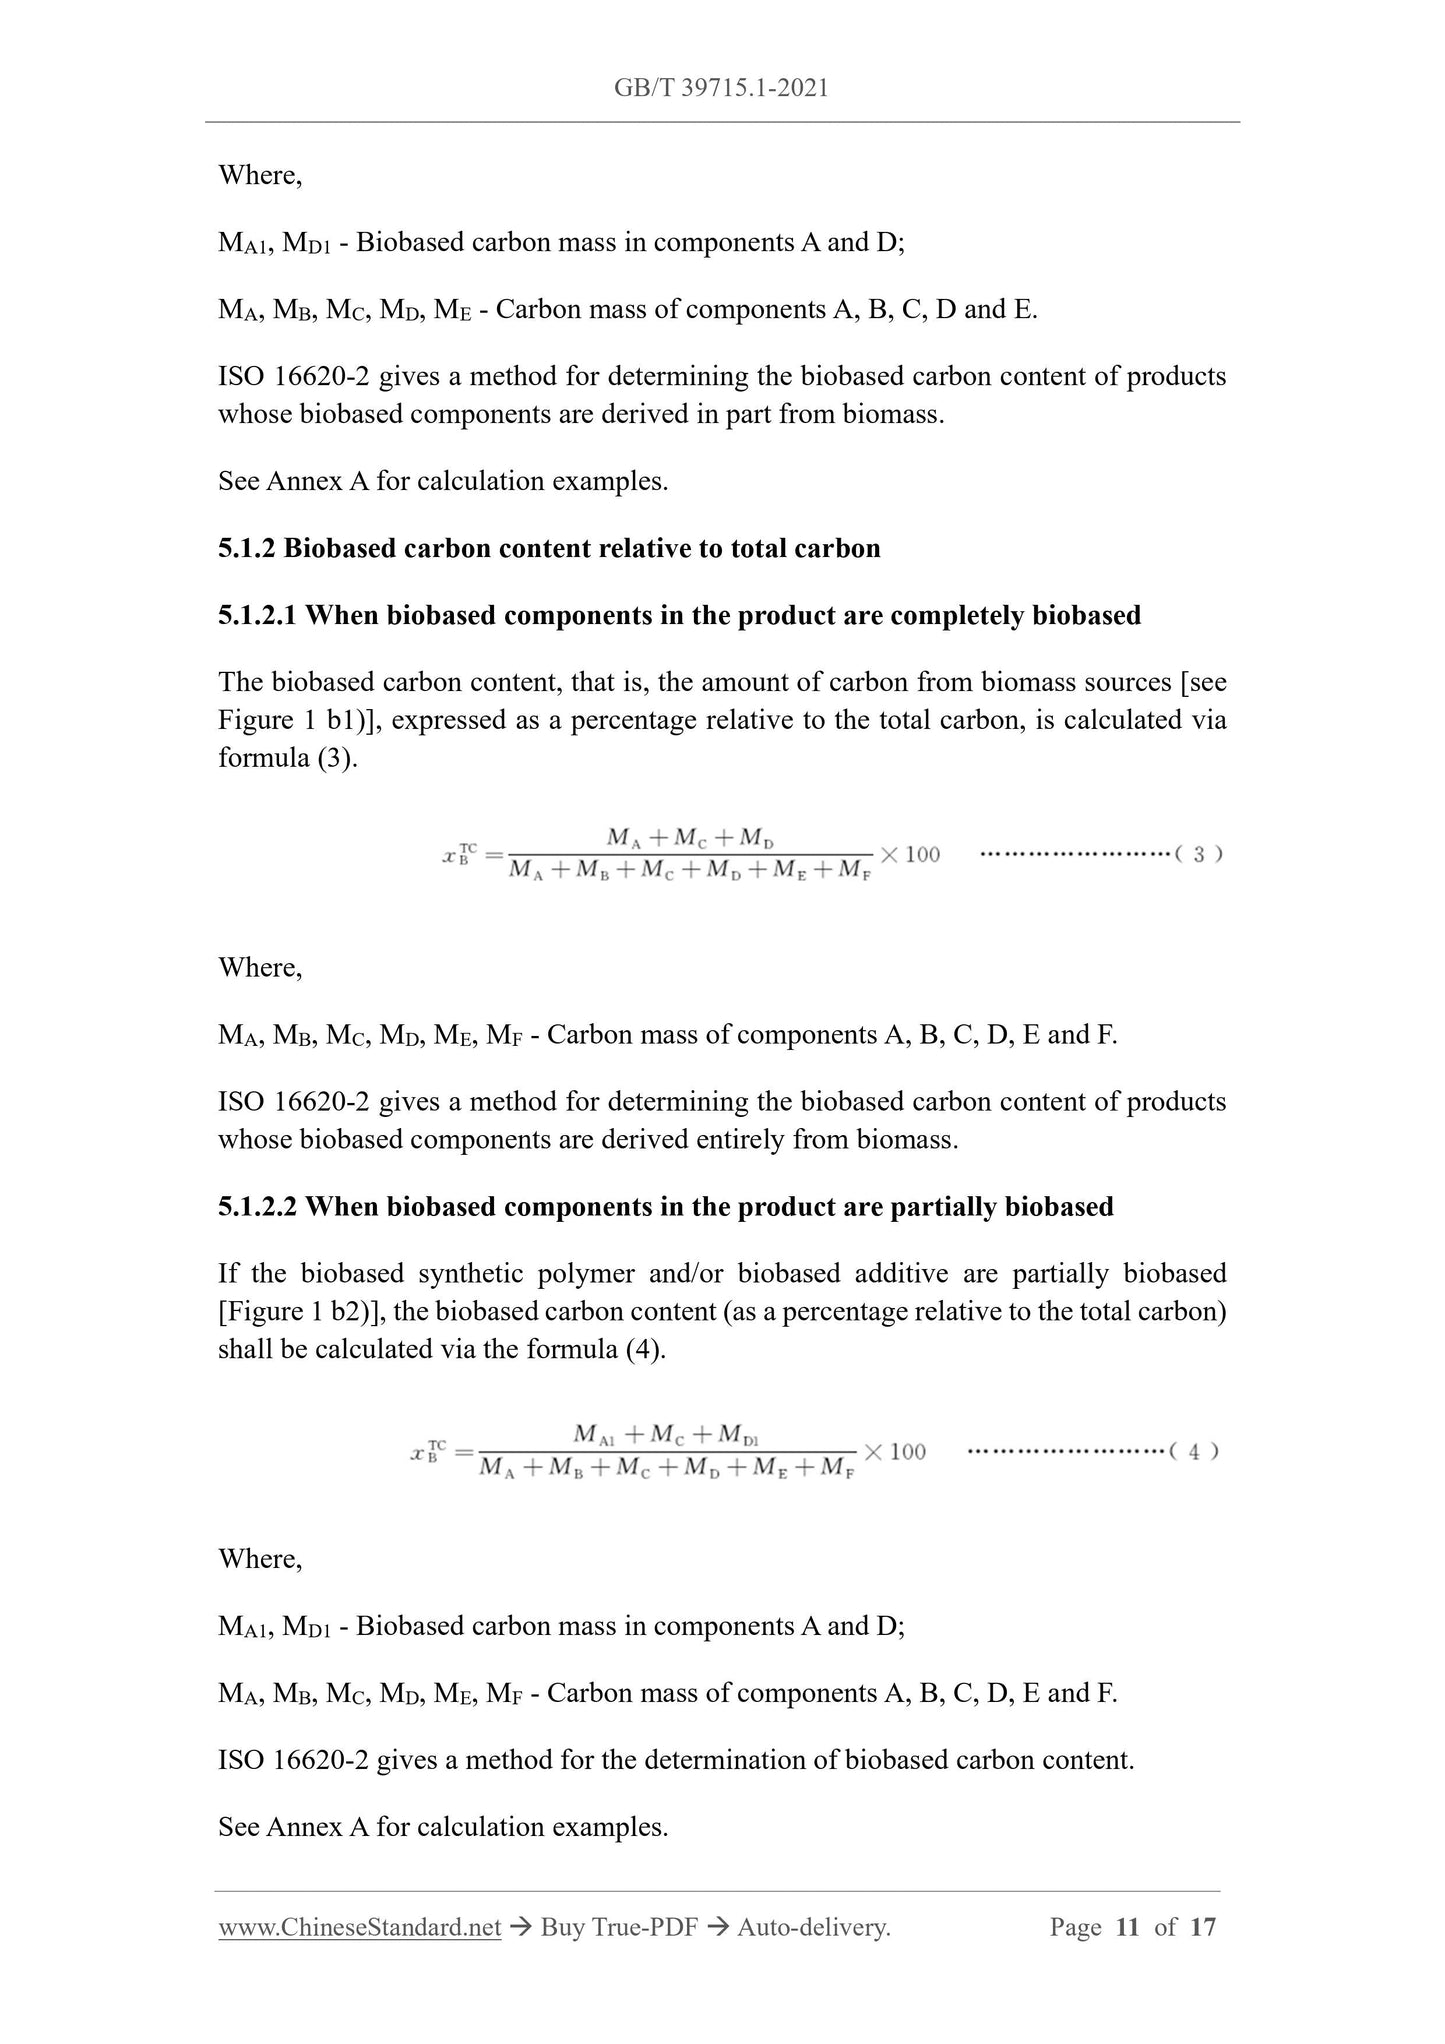 GB/T 39715.1-2021 Page 7